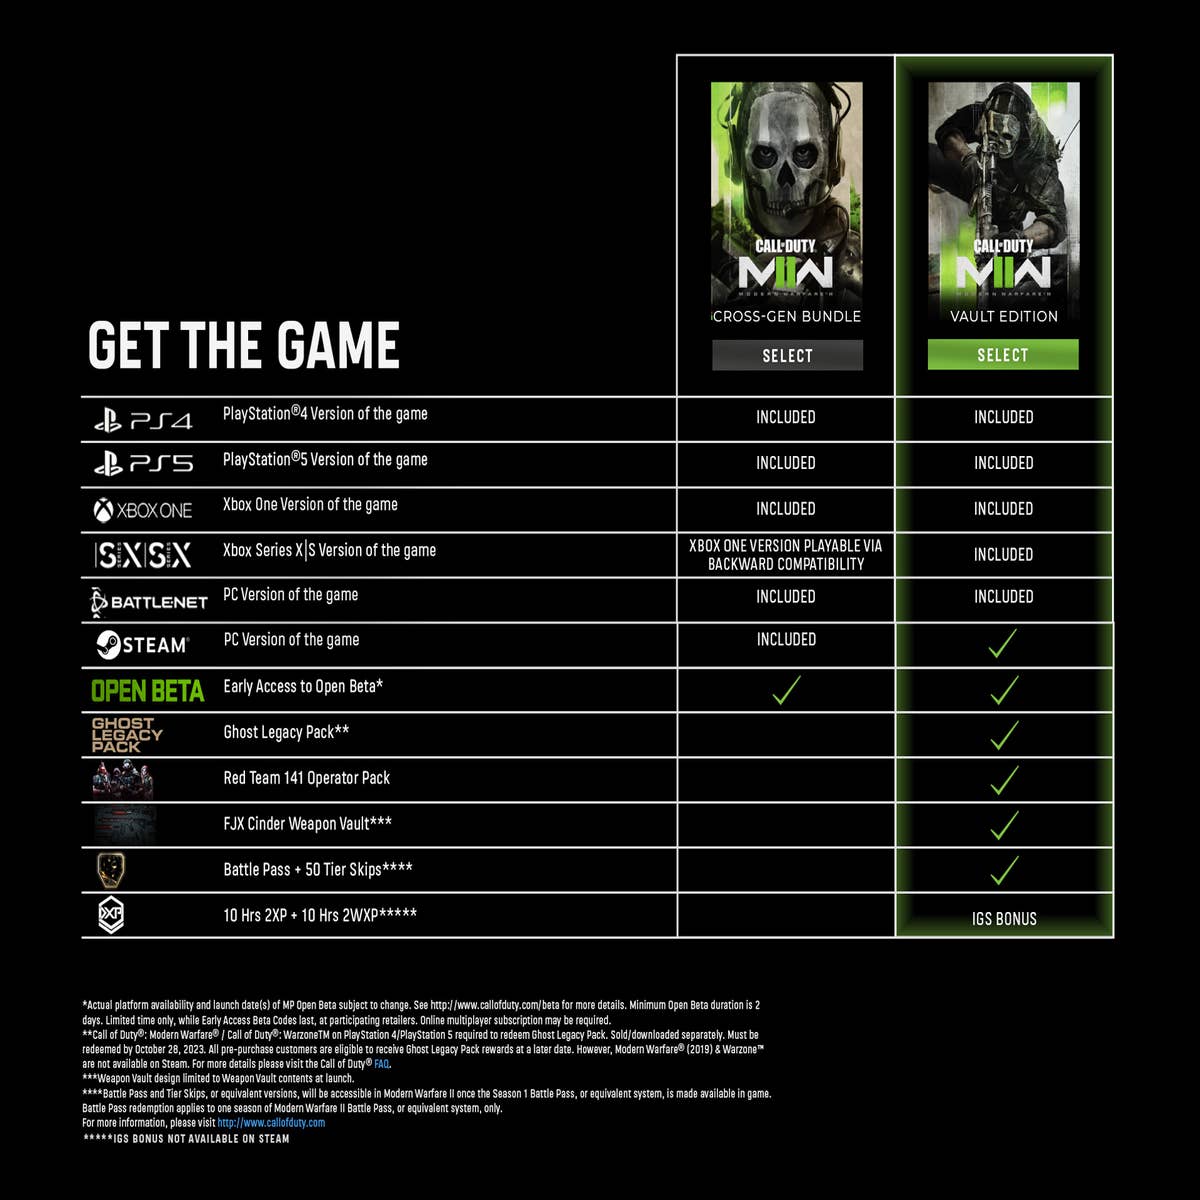 Modern Warfare 2 Vault Edition owners will get 10 hours double XP